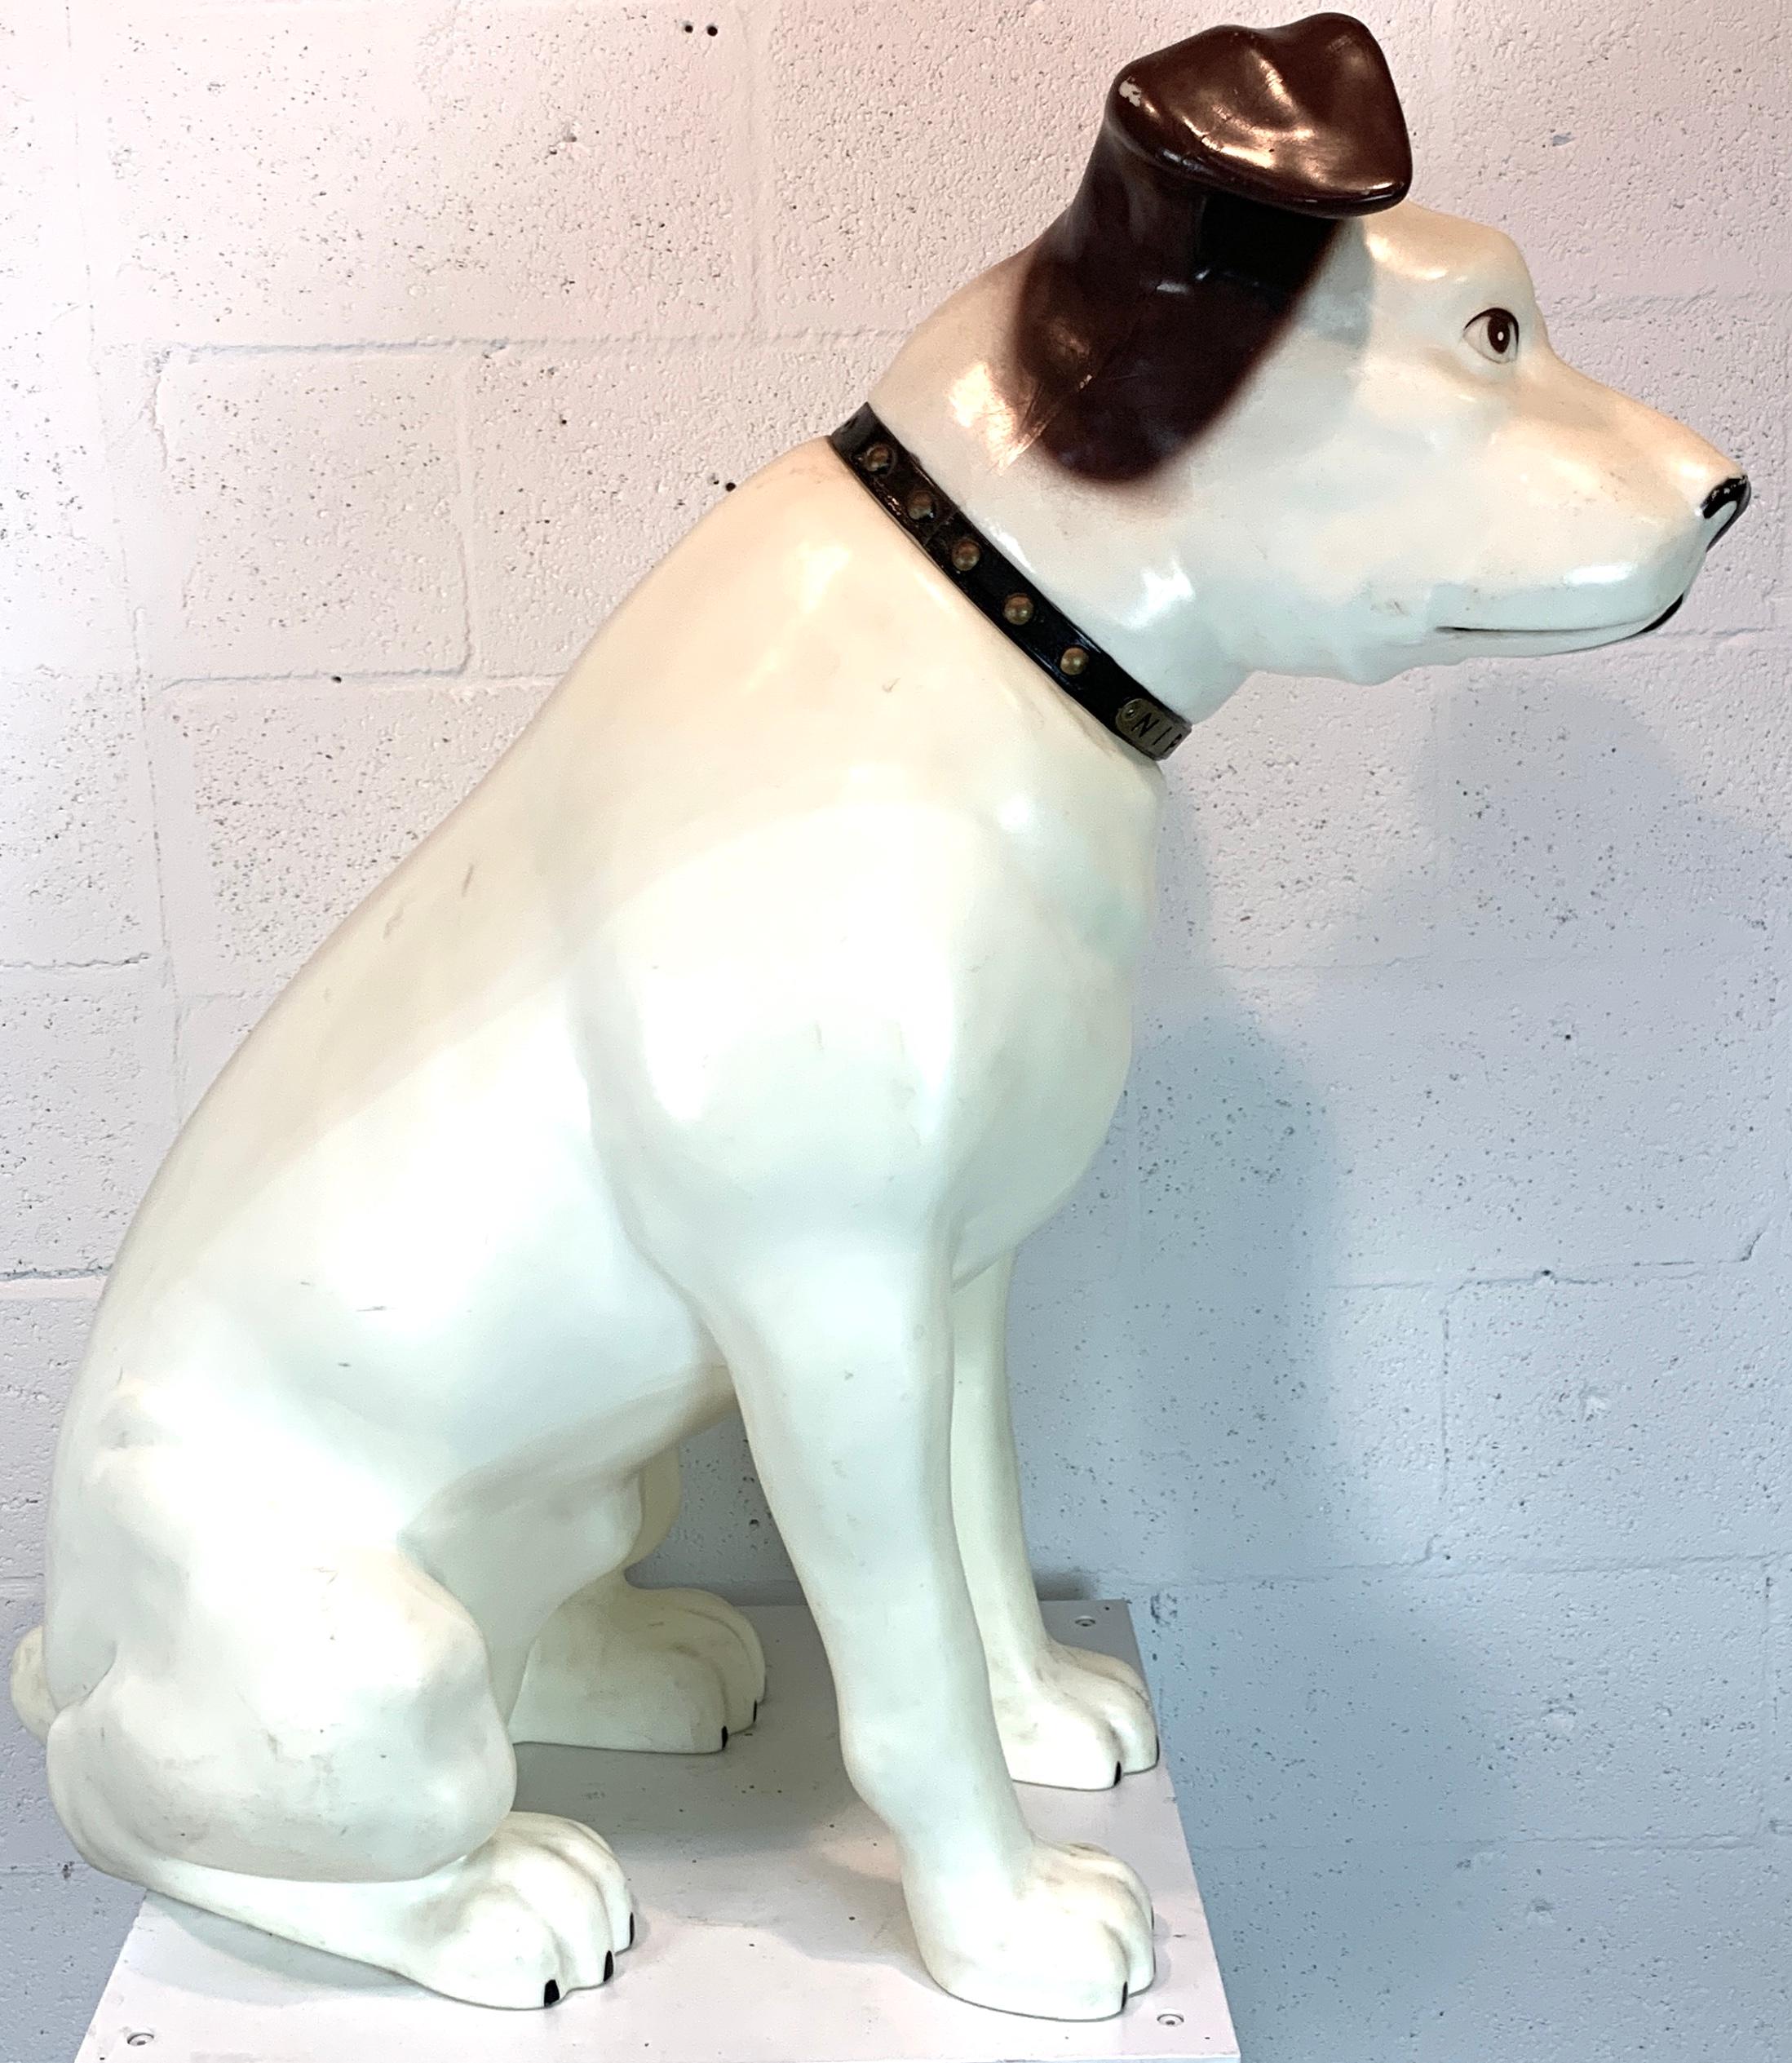 American Nipper- His Masters Voice, RCA Trademark Store Display